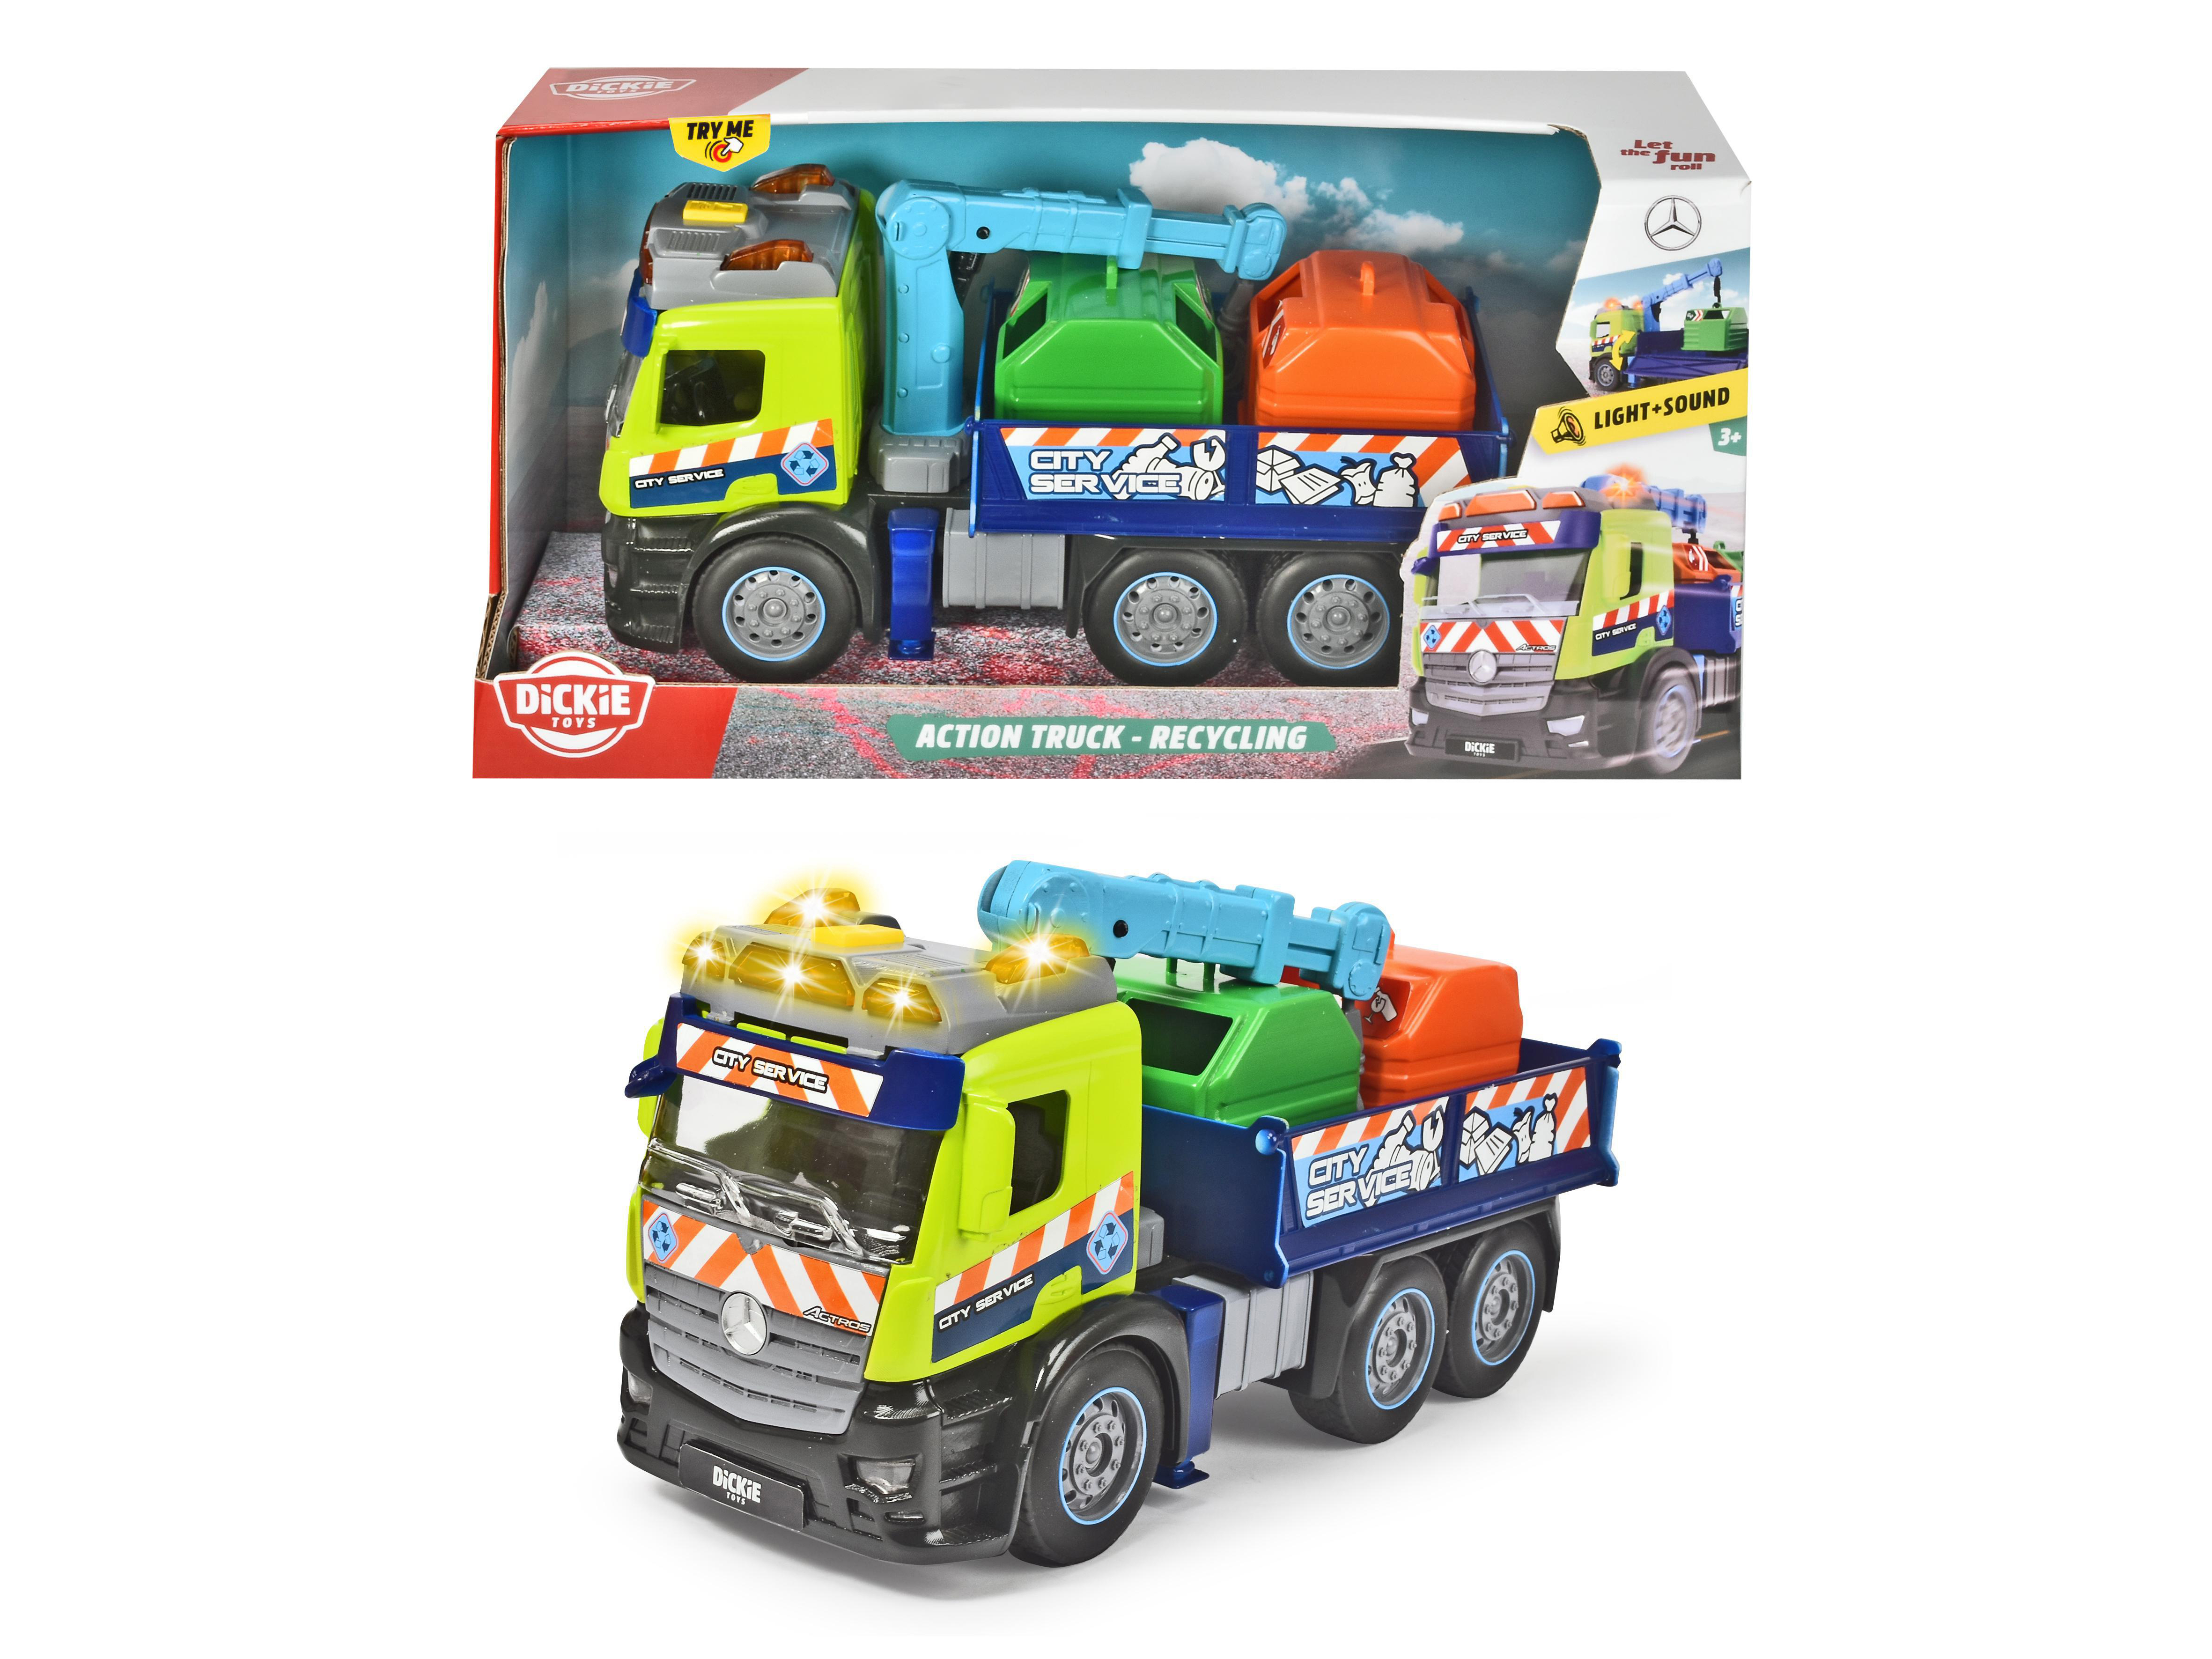 DICKIE-TOYS Mercedes Truck, Recycling, Friktion, Spielzeugauto Sound & Container, Licht inkl. Mehrfarbig